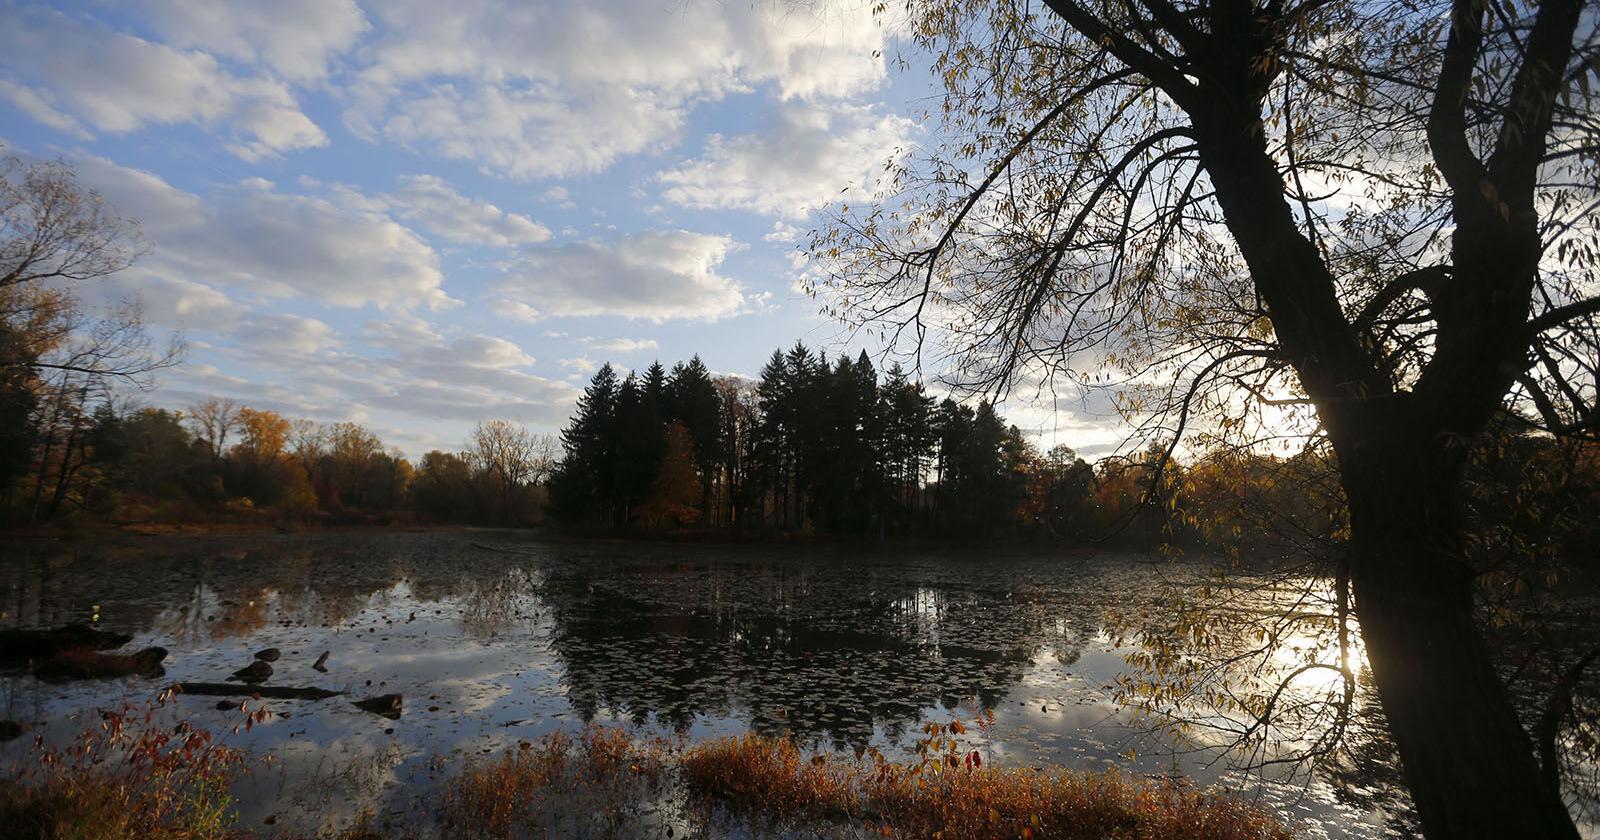 Reinstein Woods in Depew is tranquil time with nature